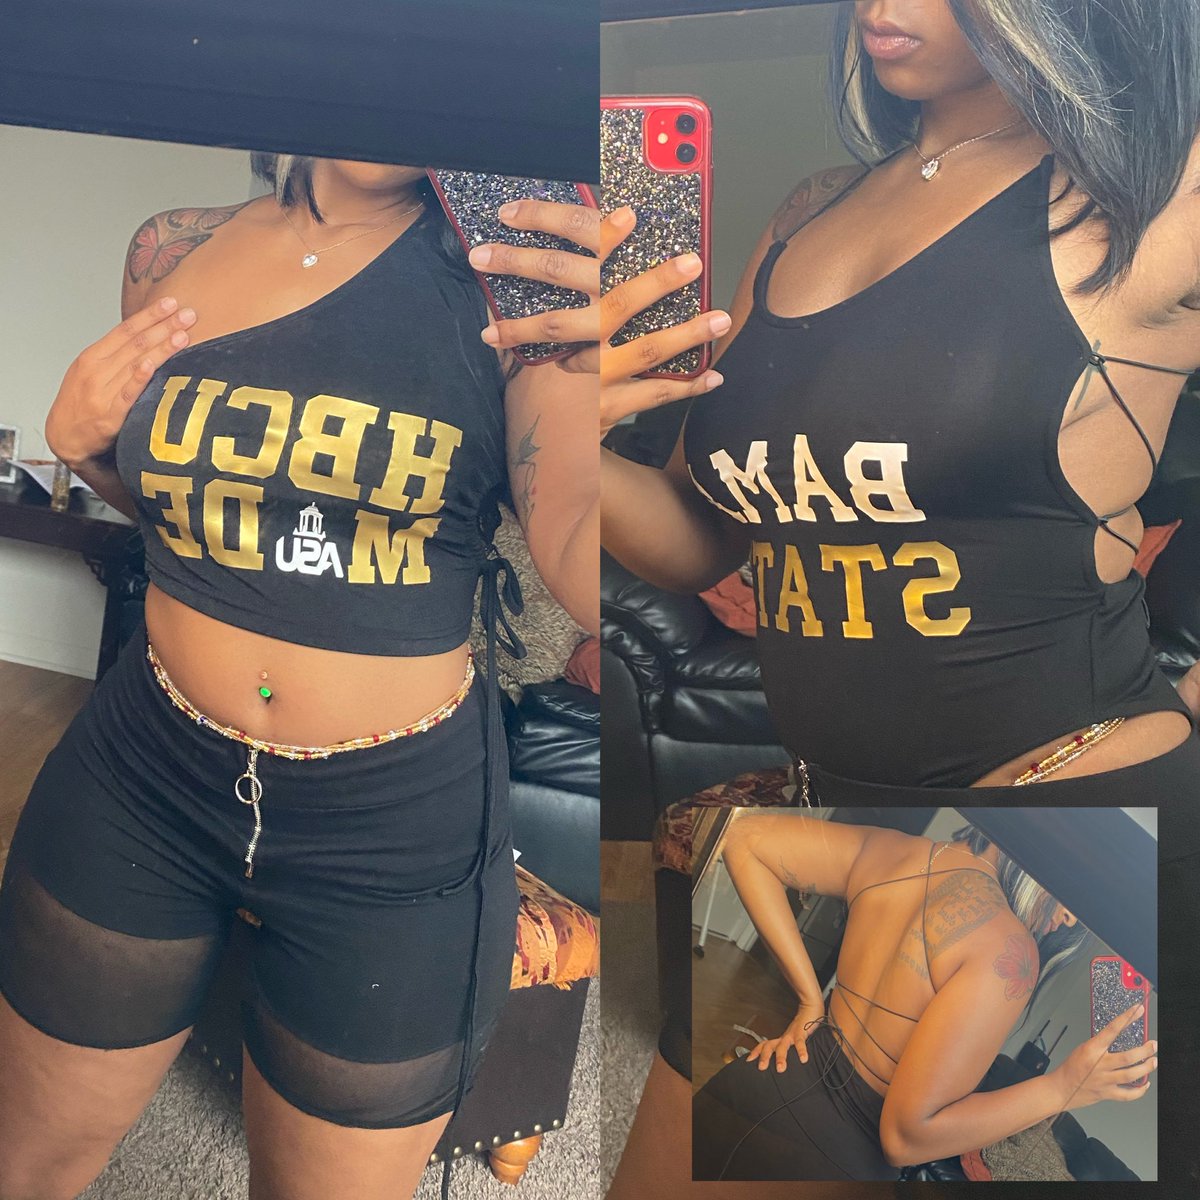 New drop innn 🔥🖤🐝💛 SHOP WITH ME FOR LABOR DAY CLASSIC ! Do not wait until the last minute I WILL sell out!!! All shirts are $15! I have Sizes XS - 2X, Some styles I only have a limited amount!
#bamastate #asu #alabamastate #myasu24 #myasu #LaborDayClassic #AlabamaState